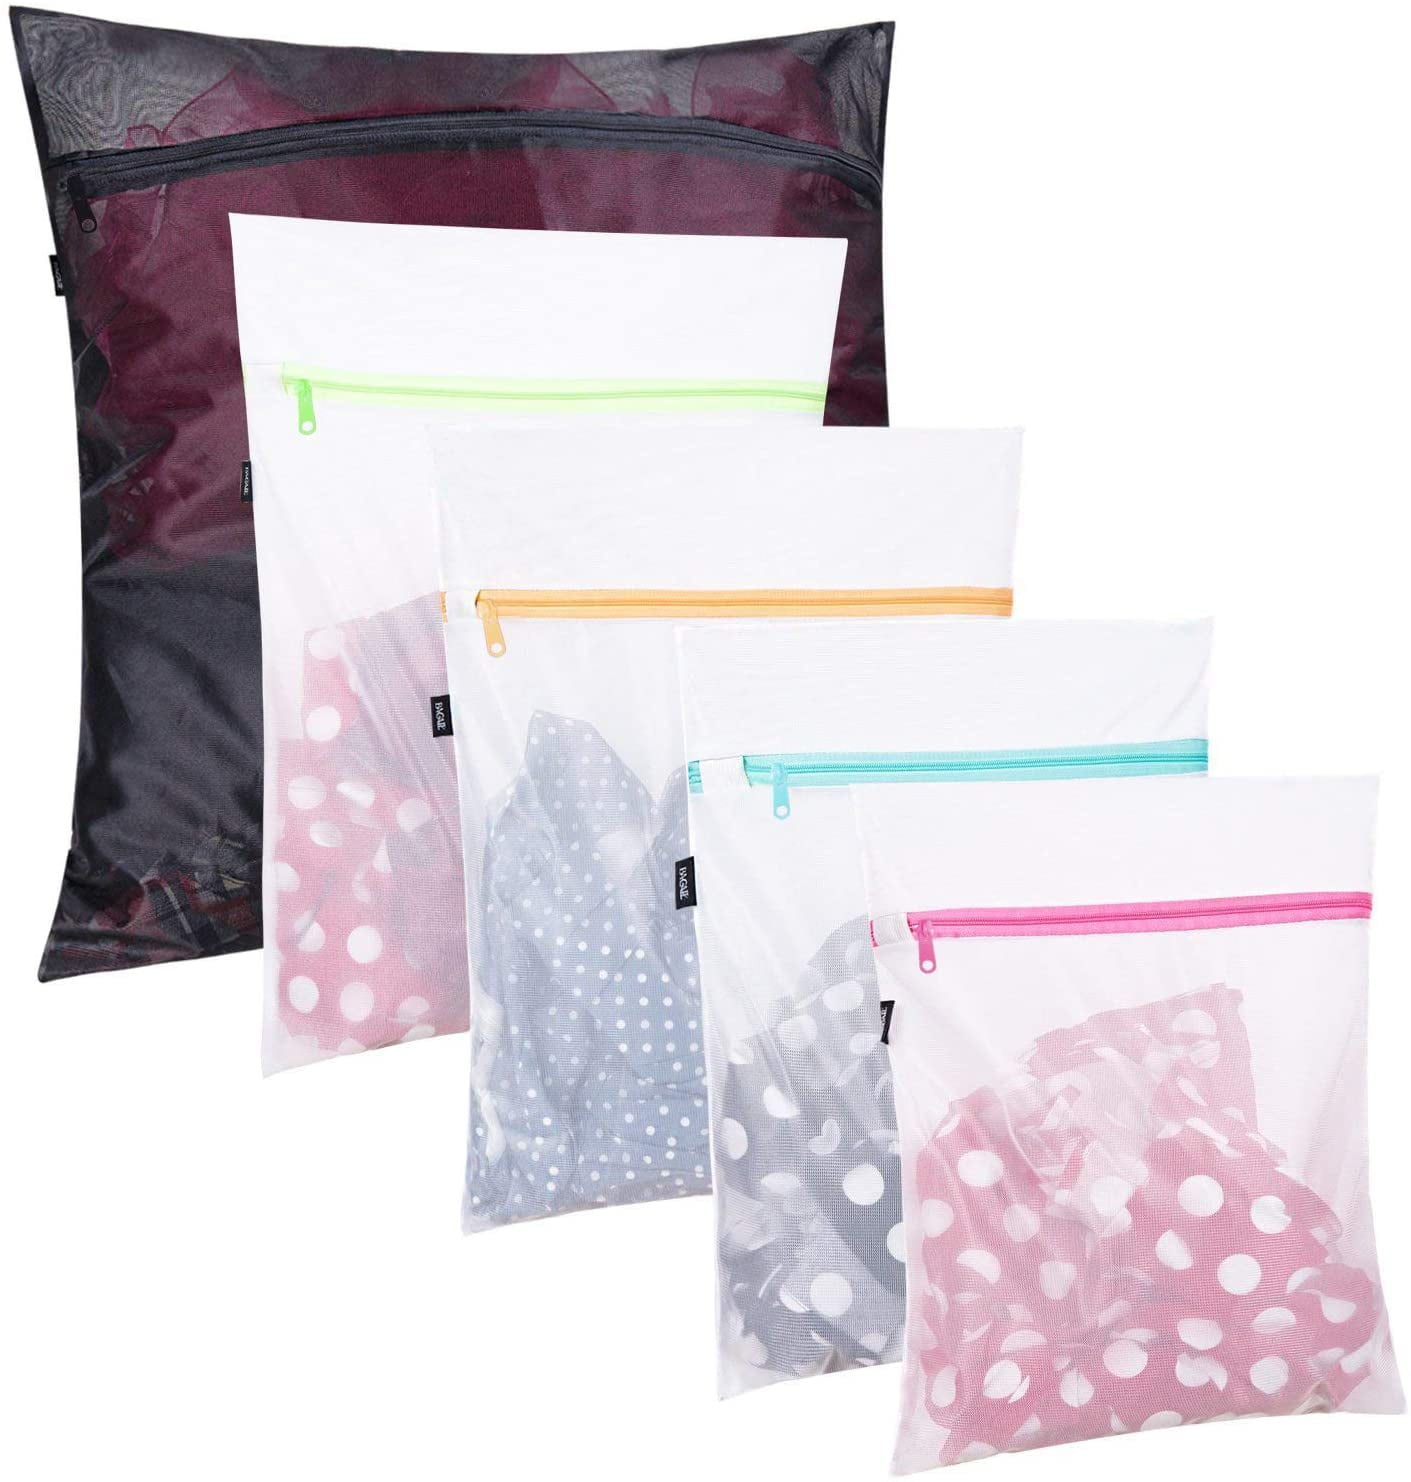 Set Of 5 Mesh Laundry Bag Delicates Bags Breathable Wash With Colored Zippers 